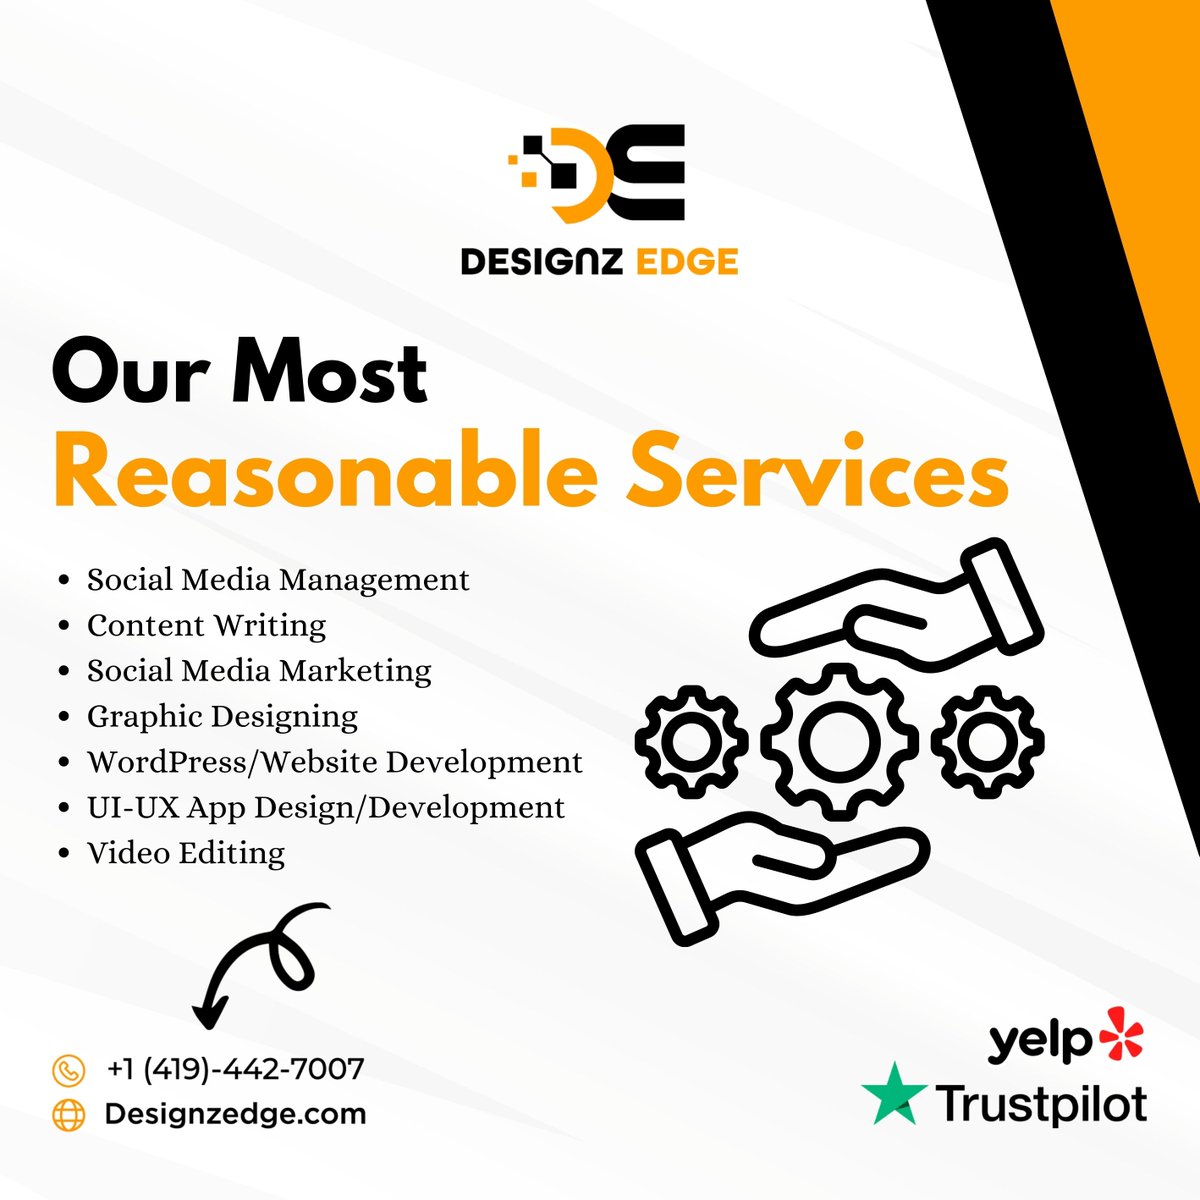 Our company offers reliable and high-quality services at competitive rates, ensuring customer satisfaction through exceptional value and performance.

#QualityService #AffordableSolutions #CustomerSatisfaction #ValueForMoney #ReliablePerformance #TopNotchService #Reasonable